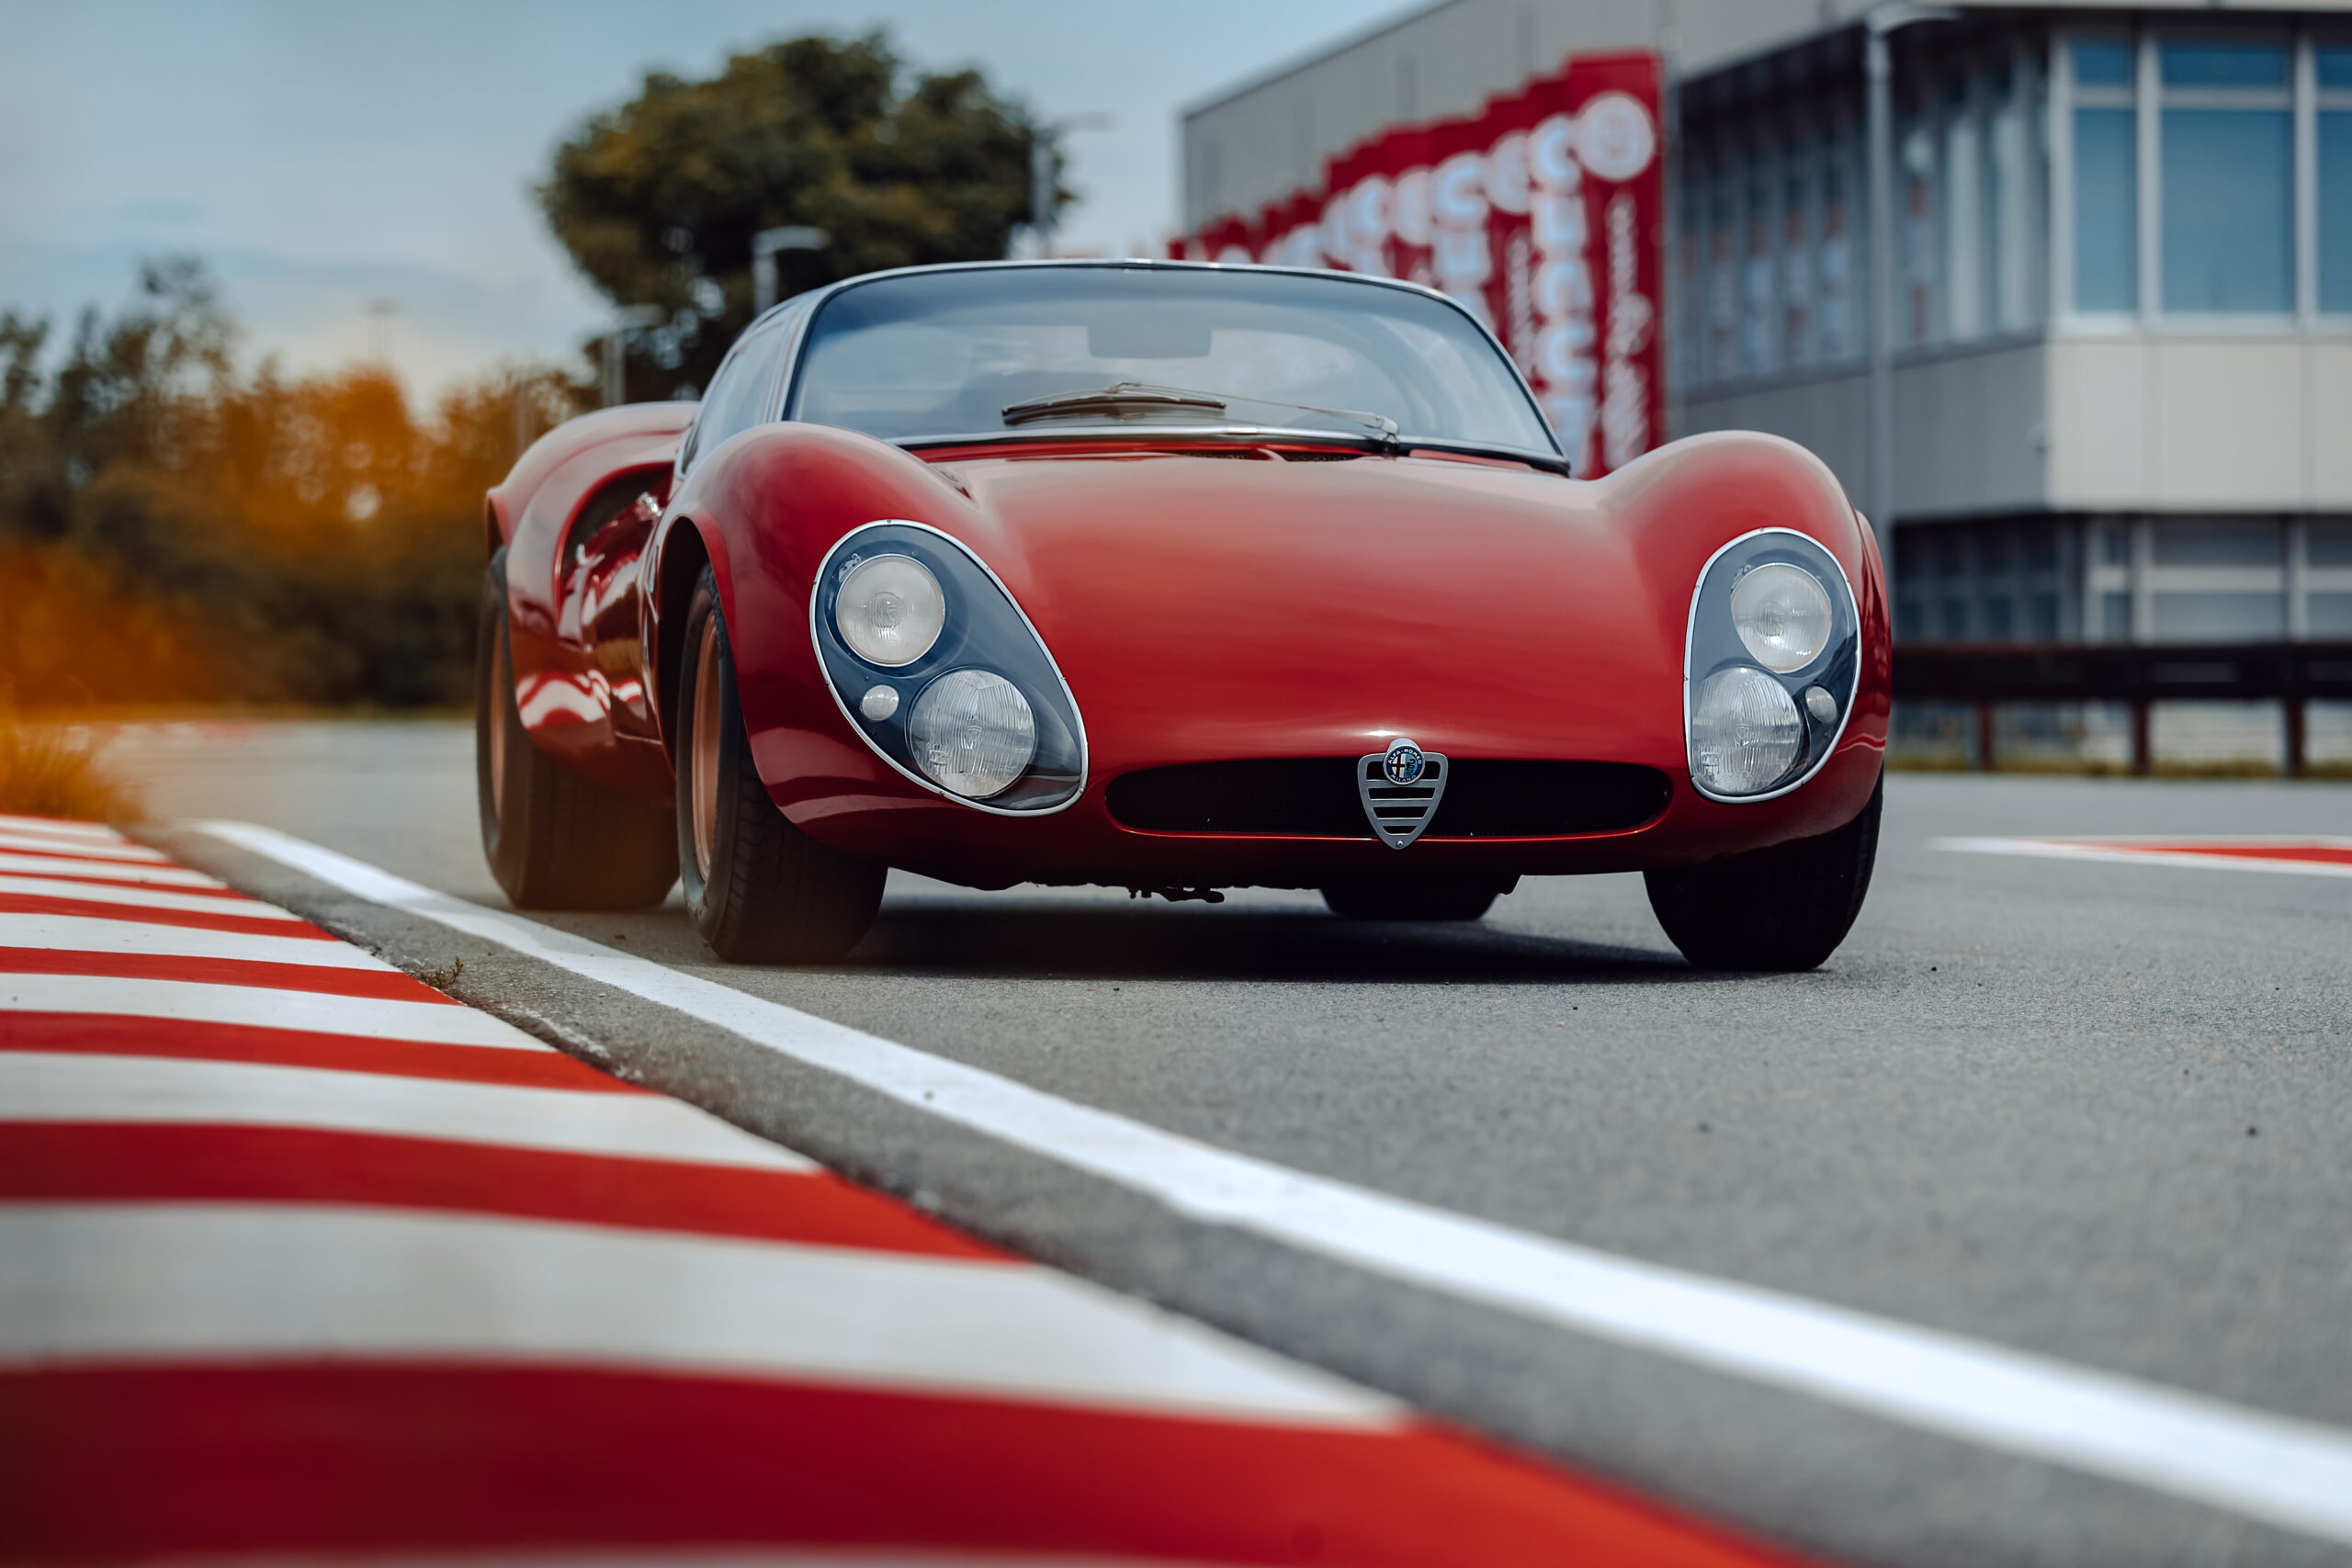 Alfa’s original 33 Stradale had a rough ride from race car to design star